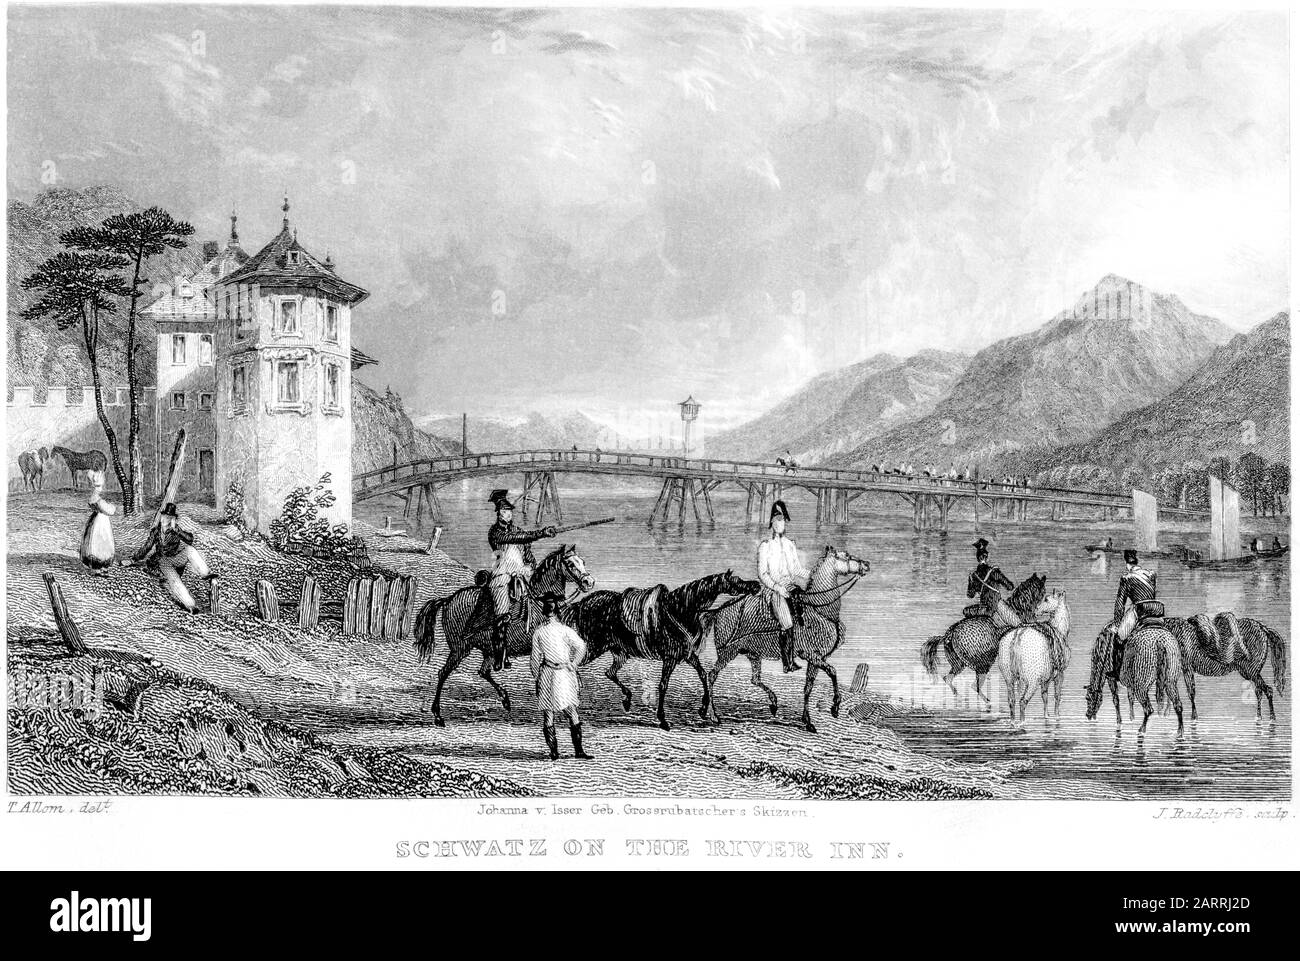 An engraving of Schwatz (Schwaz) on the River Inn scanned at high resolution from a book printed in 1836. Believed copyright free. Stock Photo